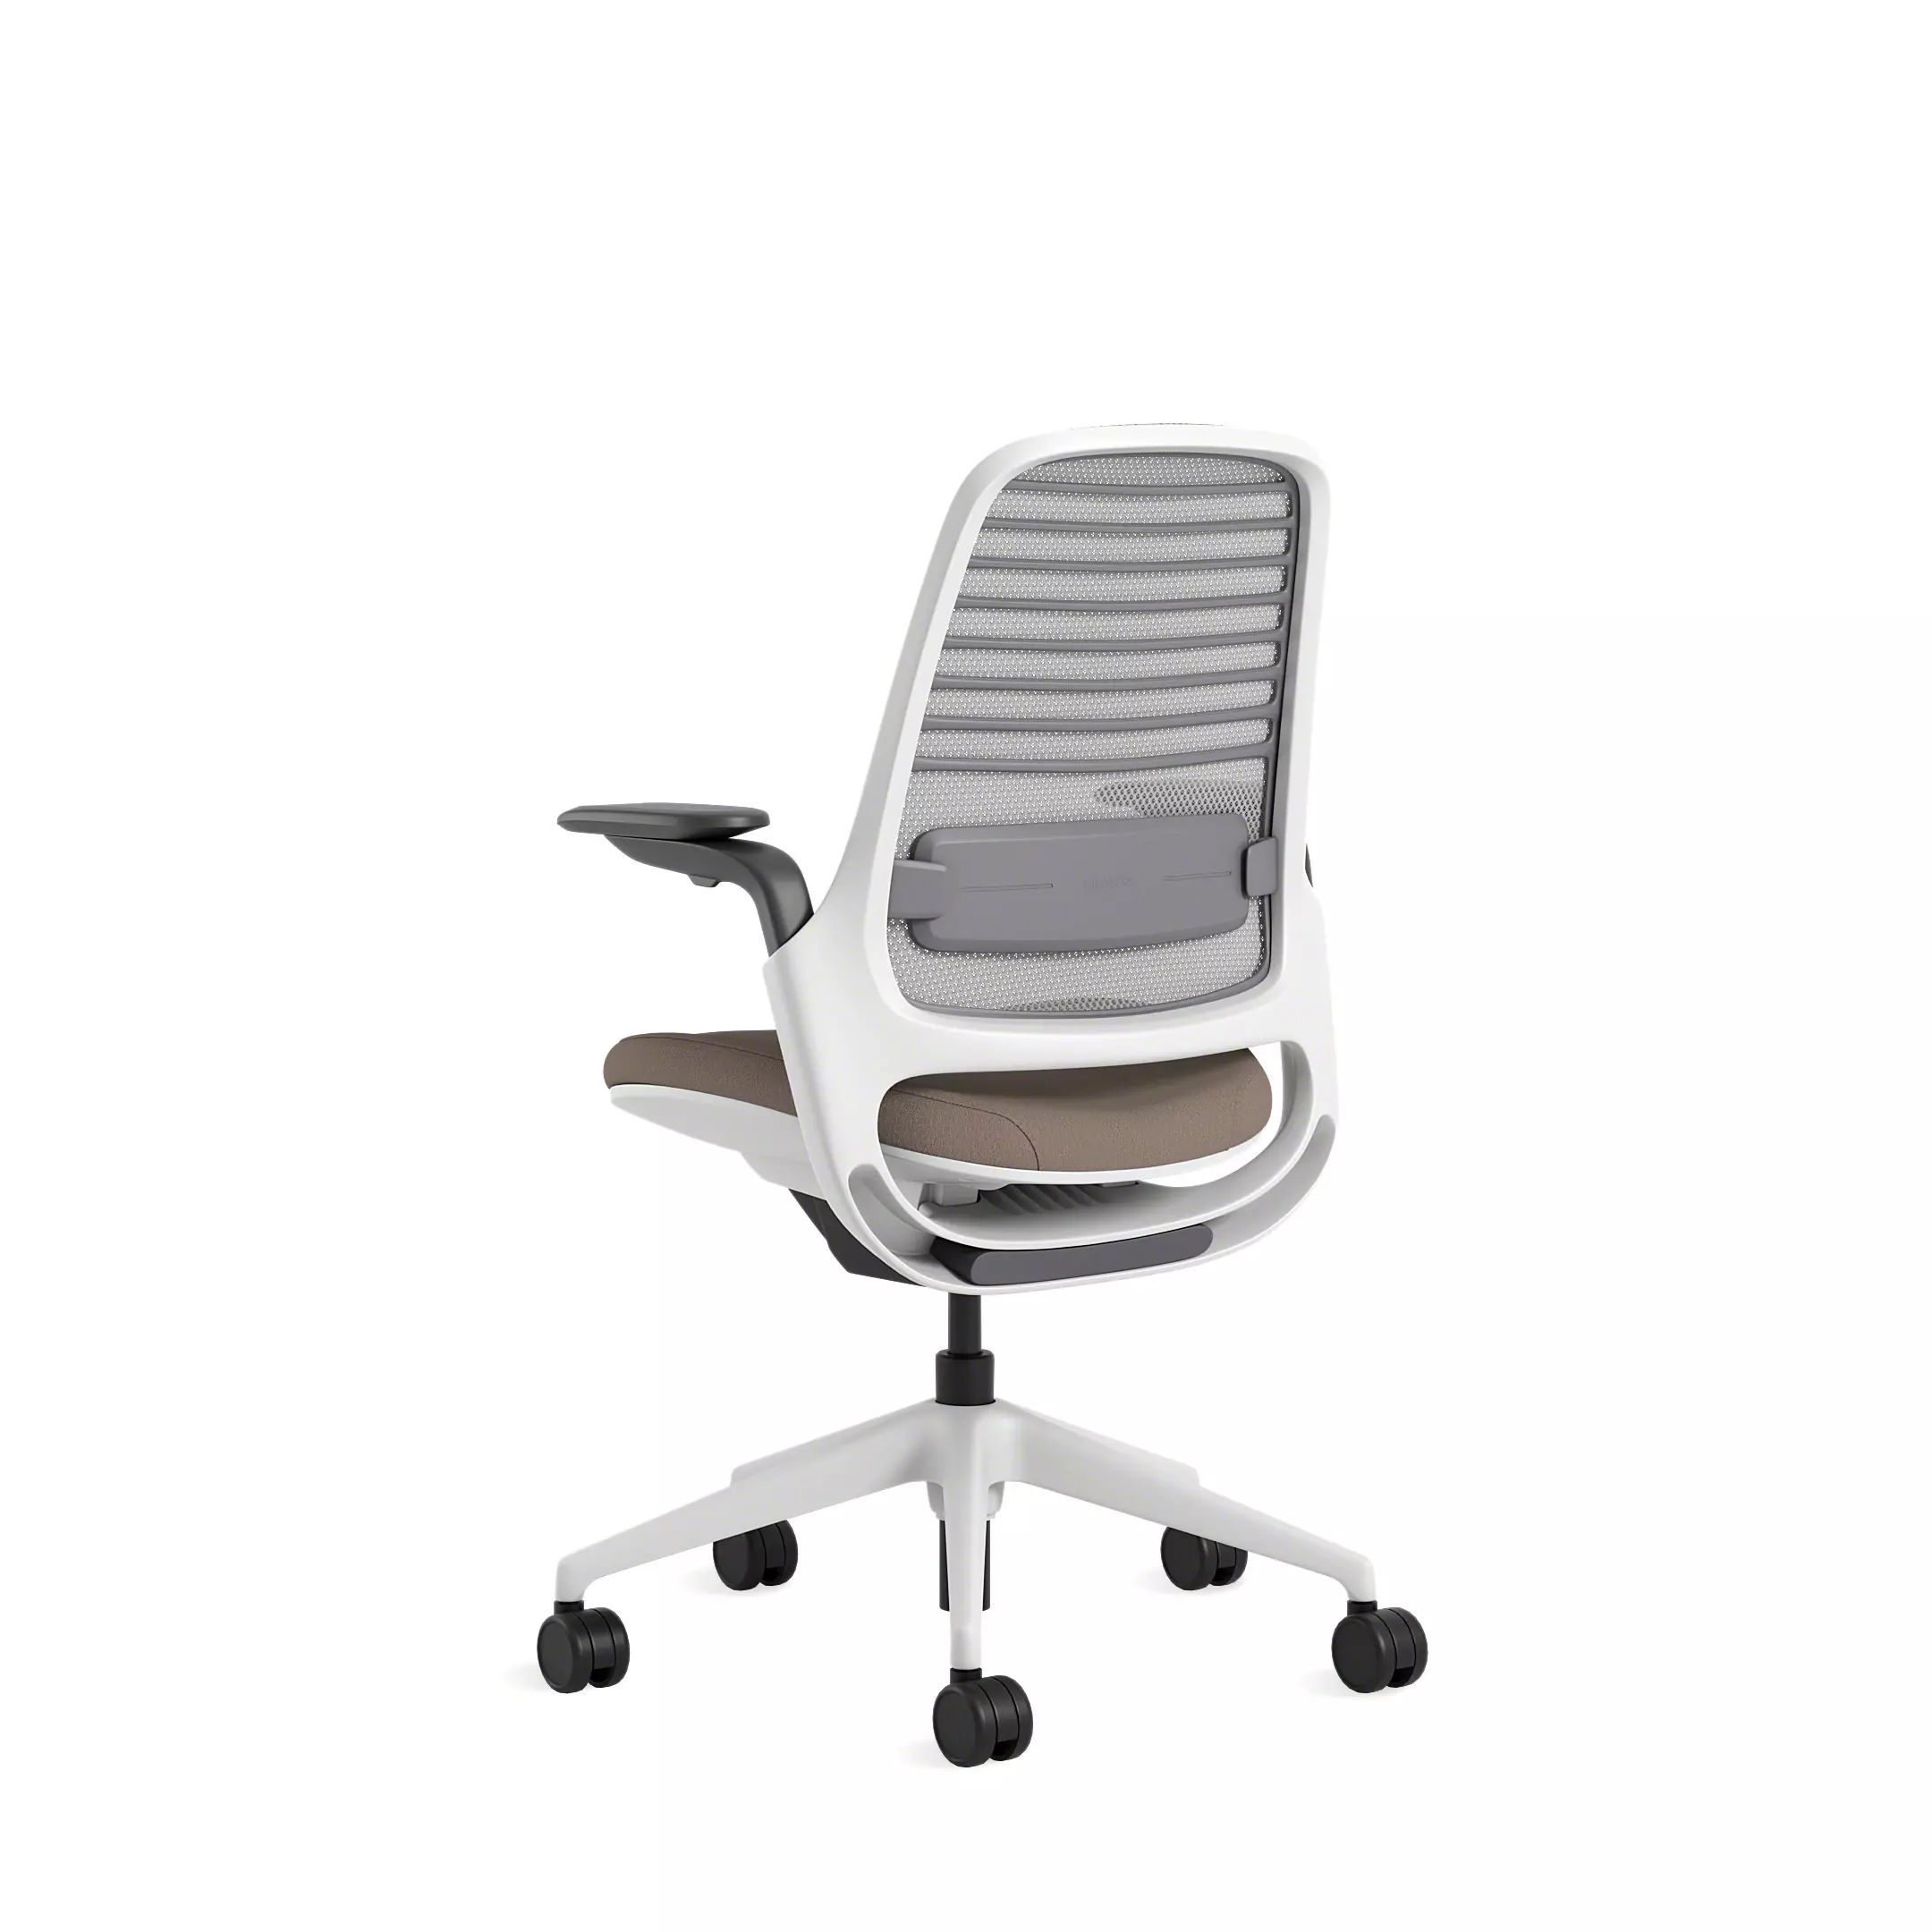 dom film barmhjertighed Steelcase Series 1 Sustainable Office Chair | Steelcase